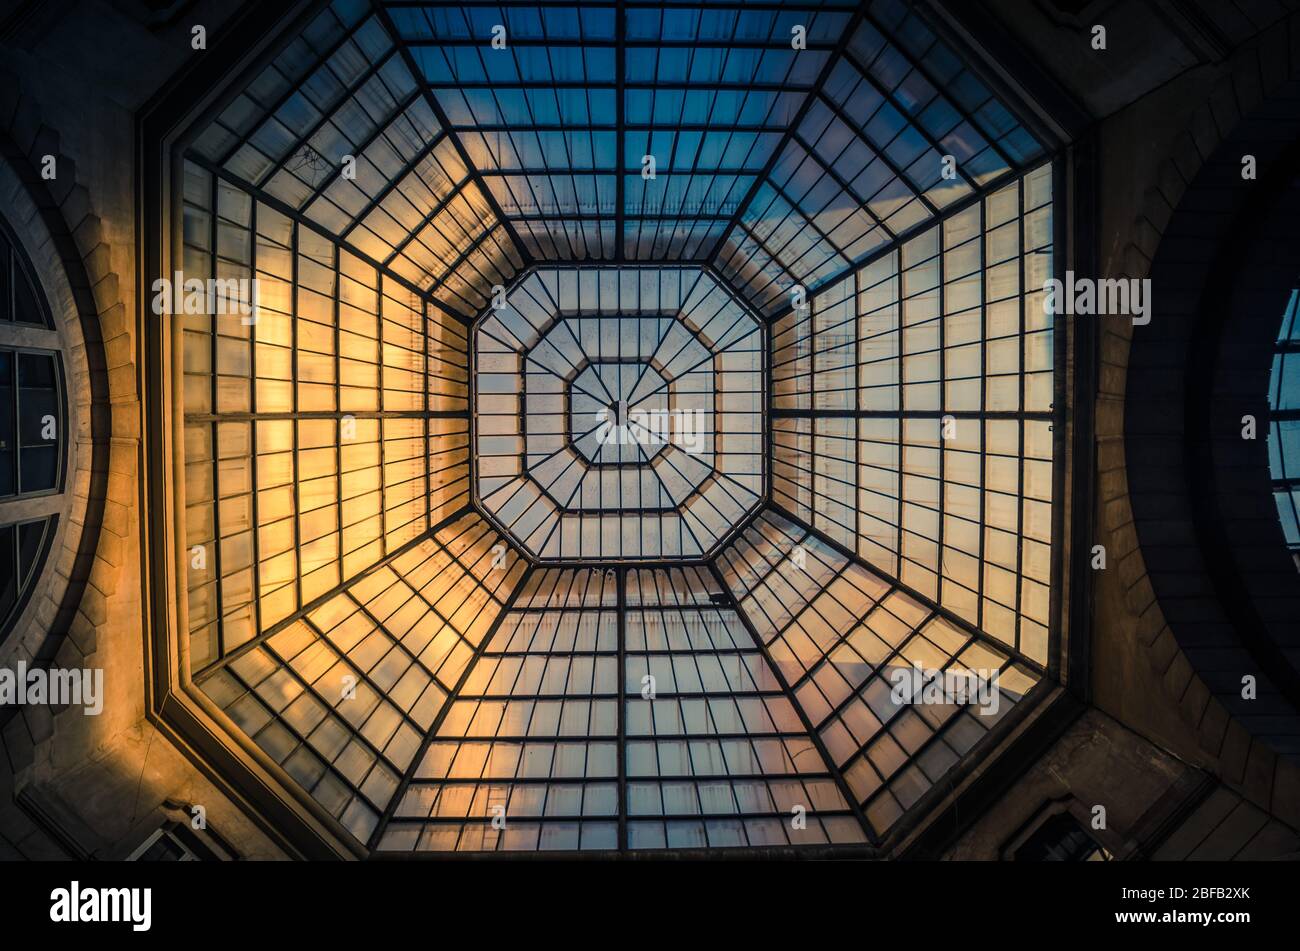 Milan, Italy, September 8, 2018: Glass and iron patterned ceiling roof of huge dome of shopping mall, view from below, Milano city Stock Photo